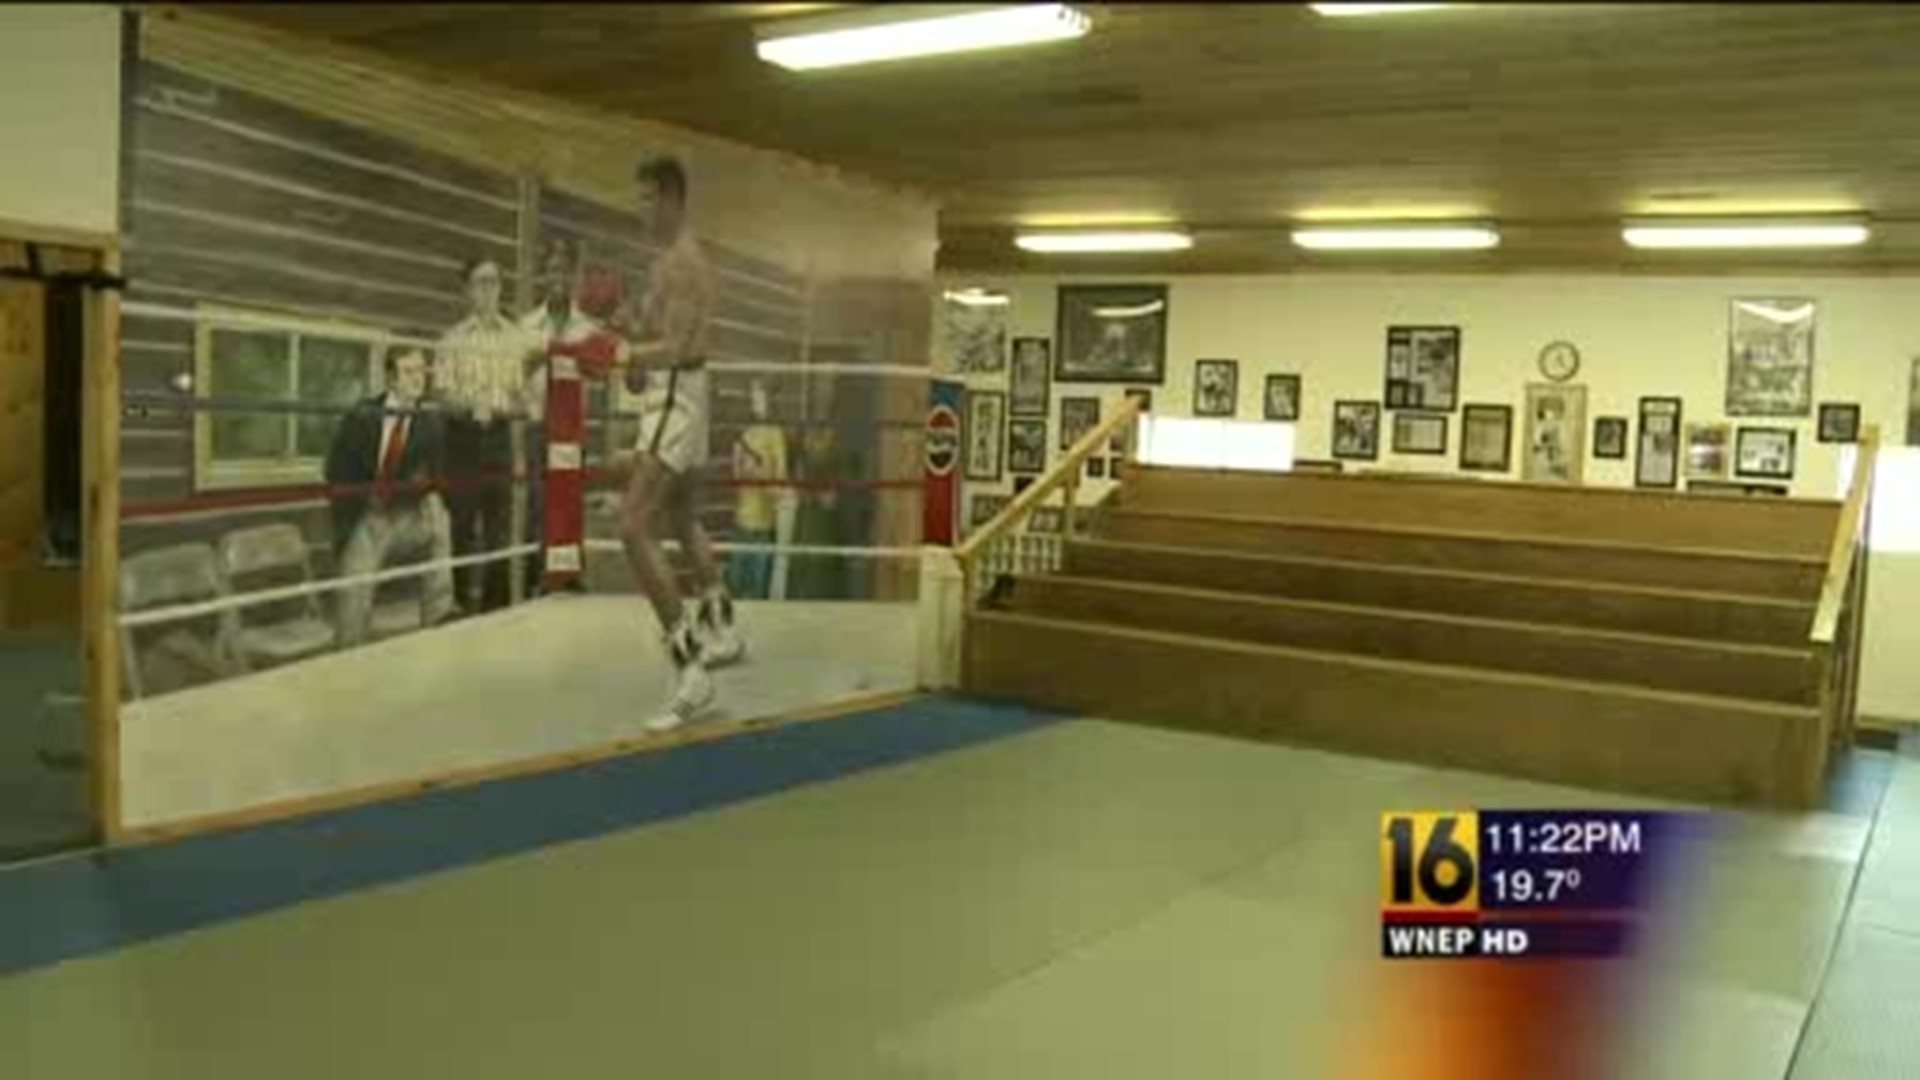 For Sale: Ali's Training Camp